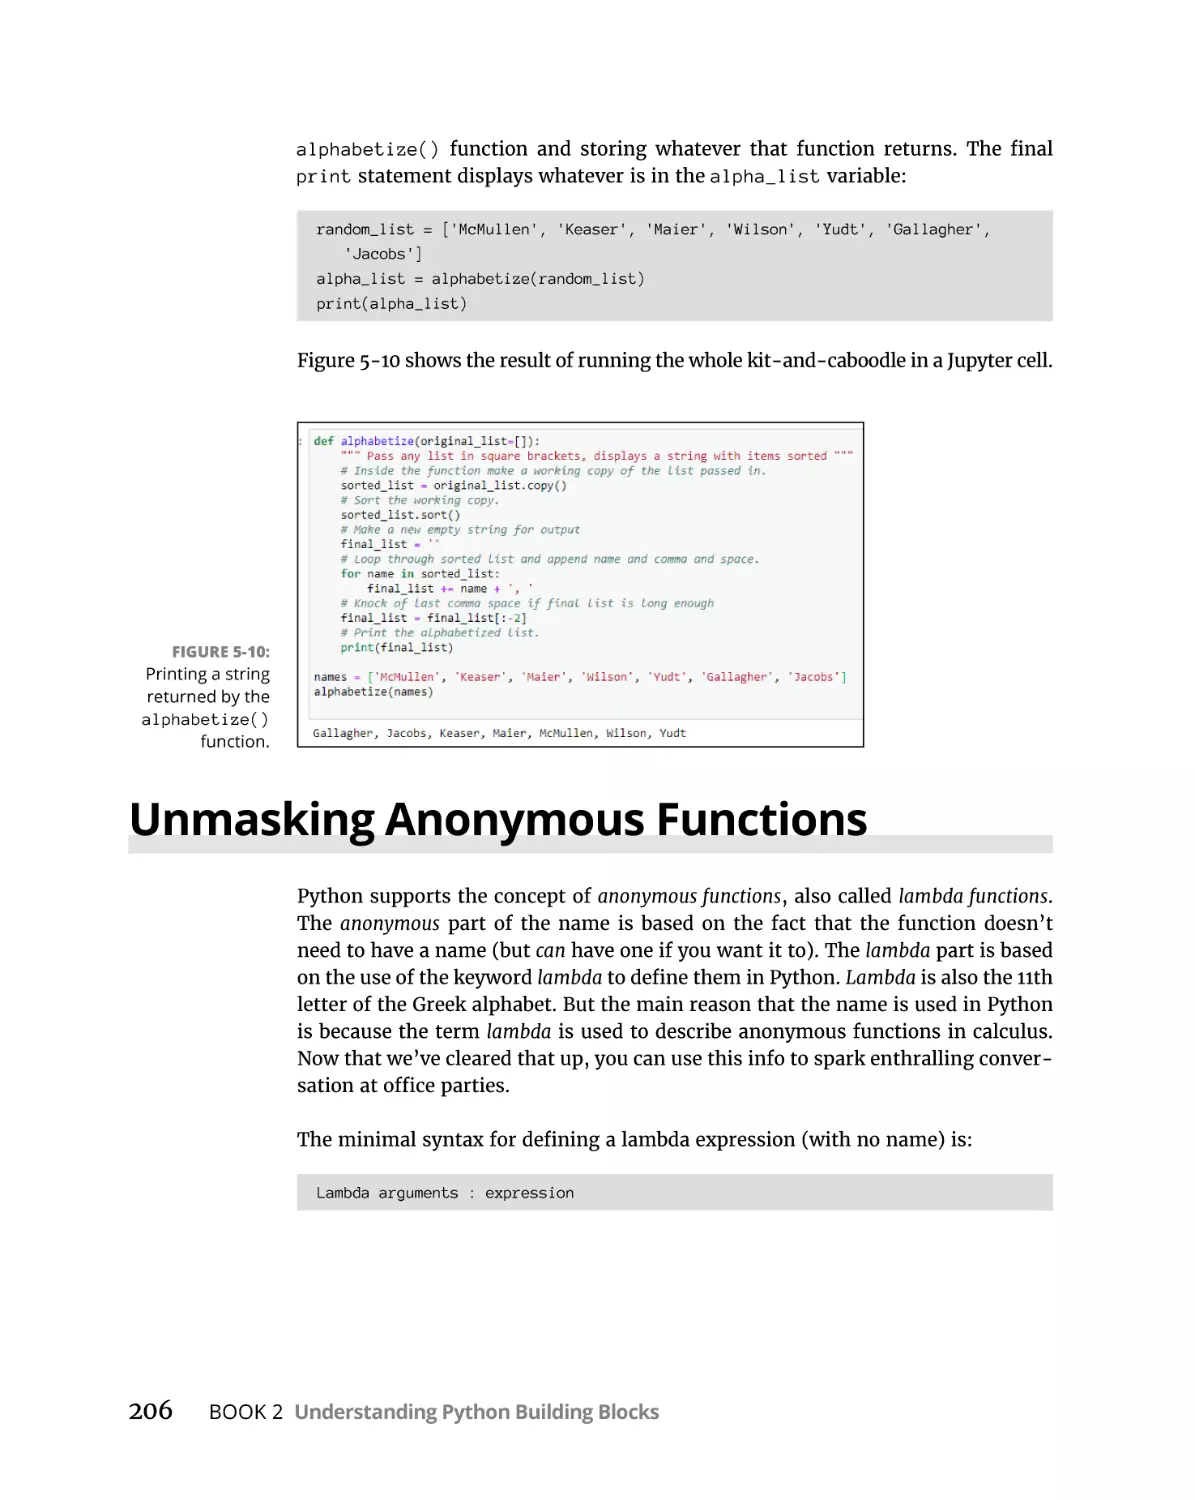 Unmasking Anonymous Functions